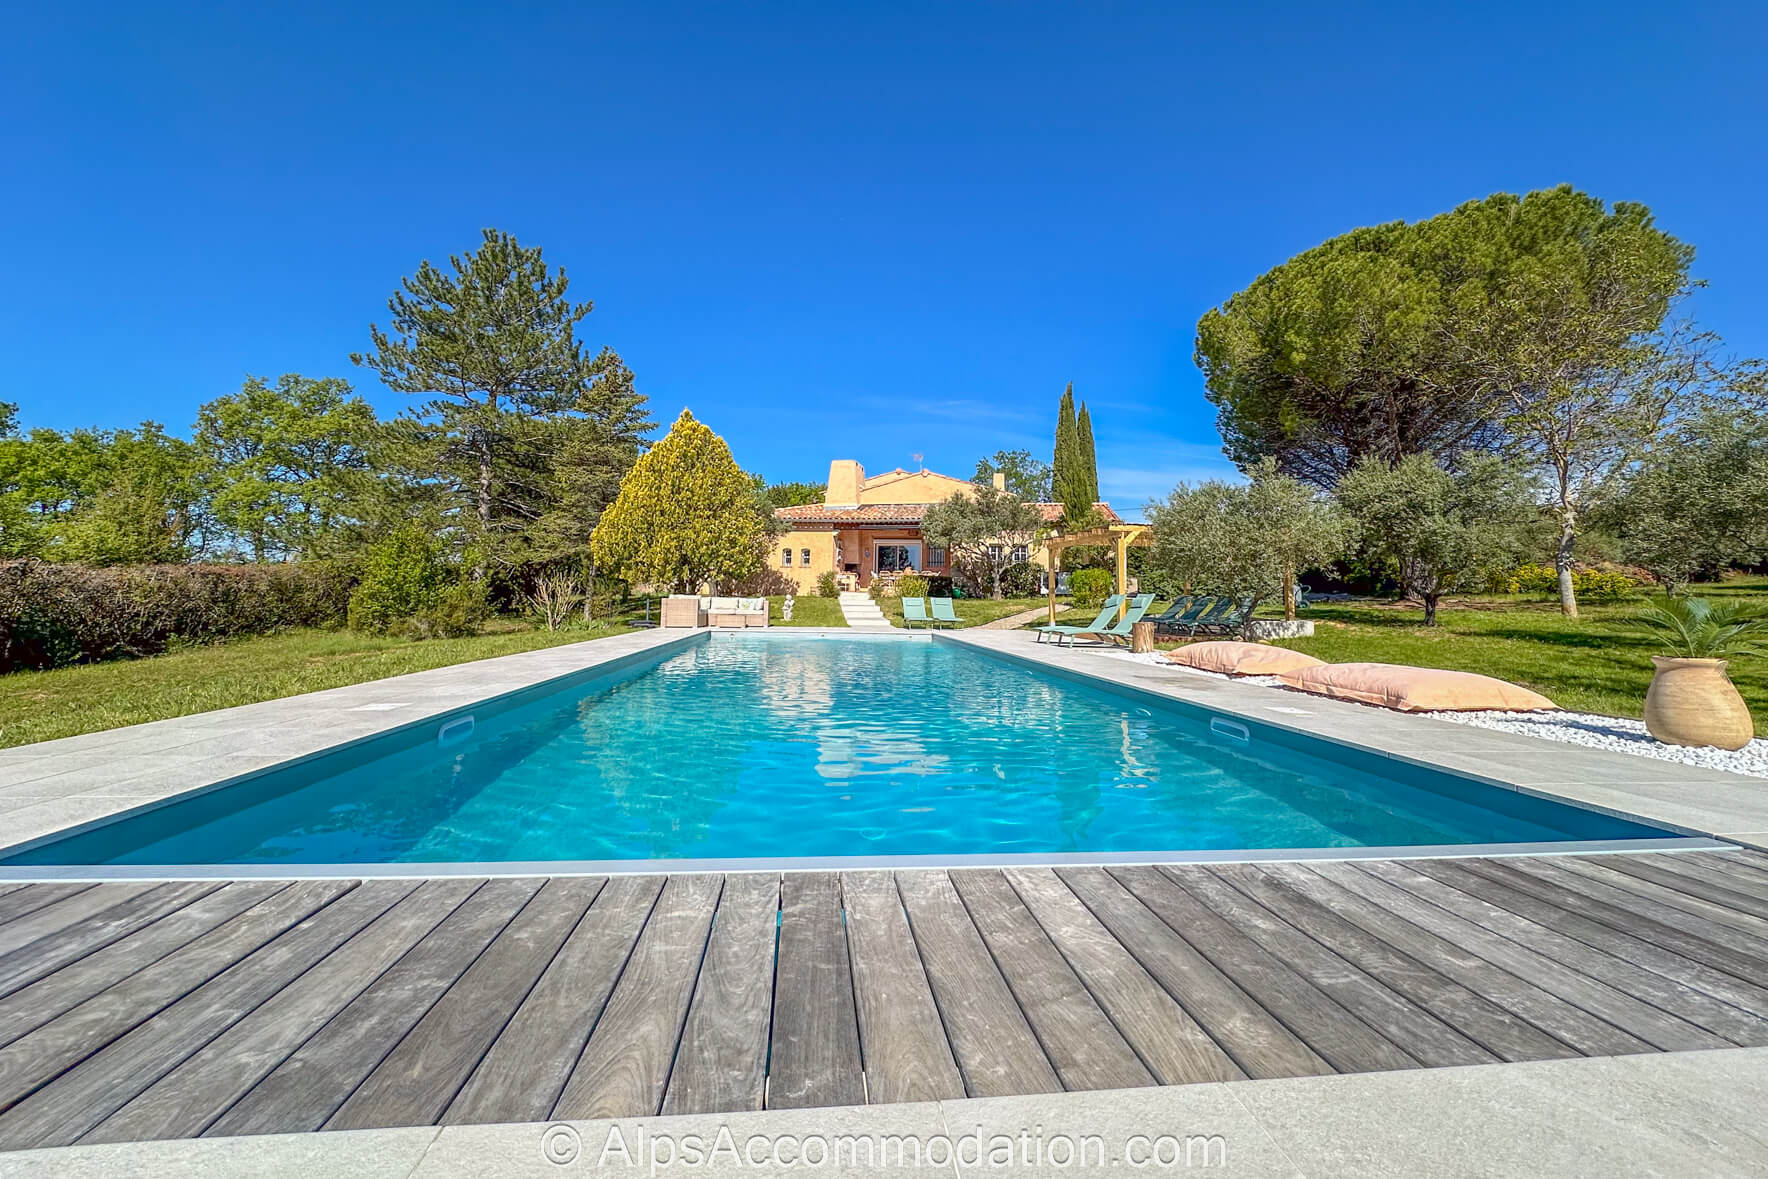 Le Mas Aups - A wonderful heated 15m x 5m private swimming pool